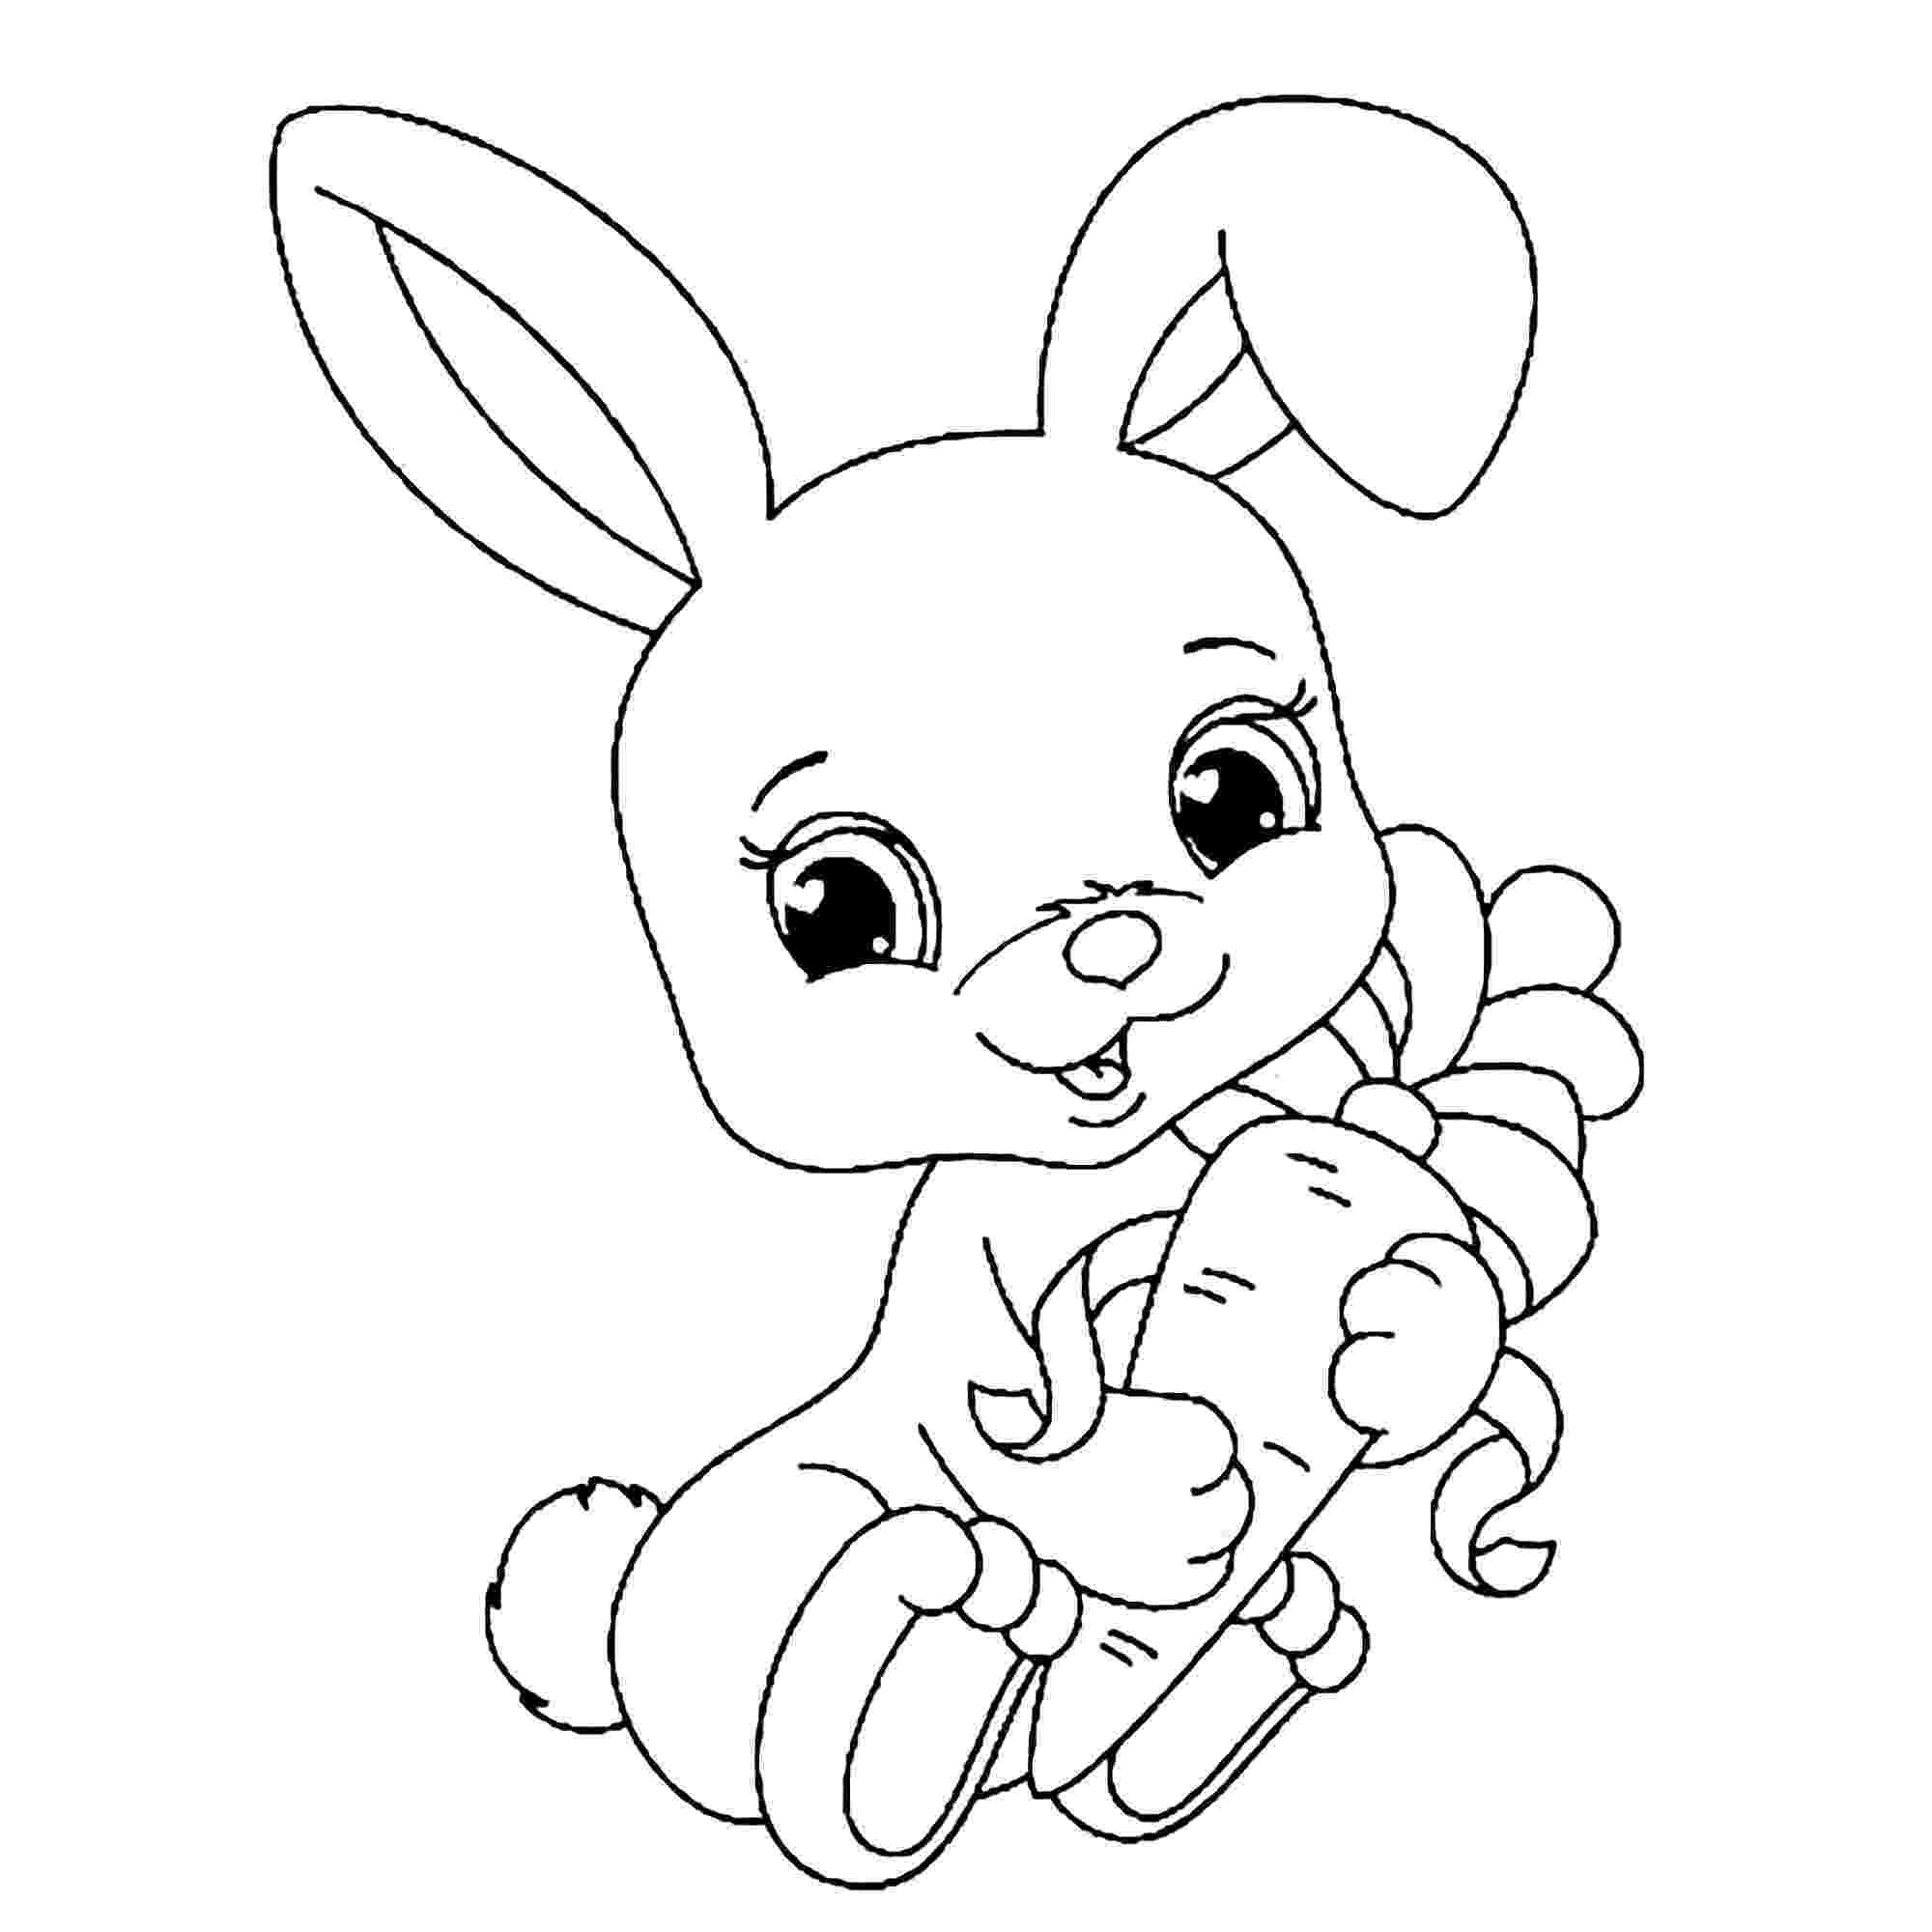 coloring pictures of rabbits bunny coloring pages best coloring pages for kids of pictures rabbits coloring 